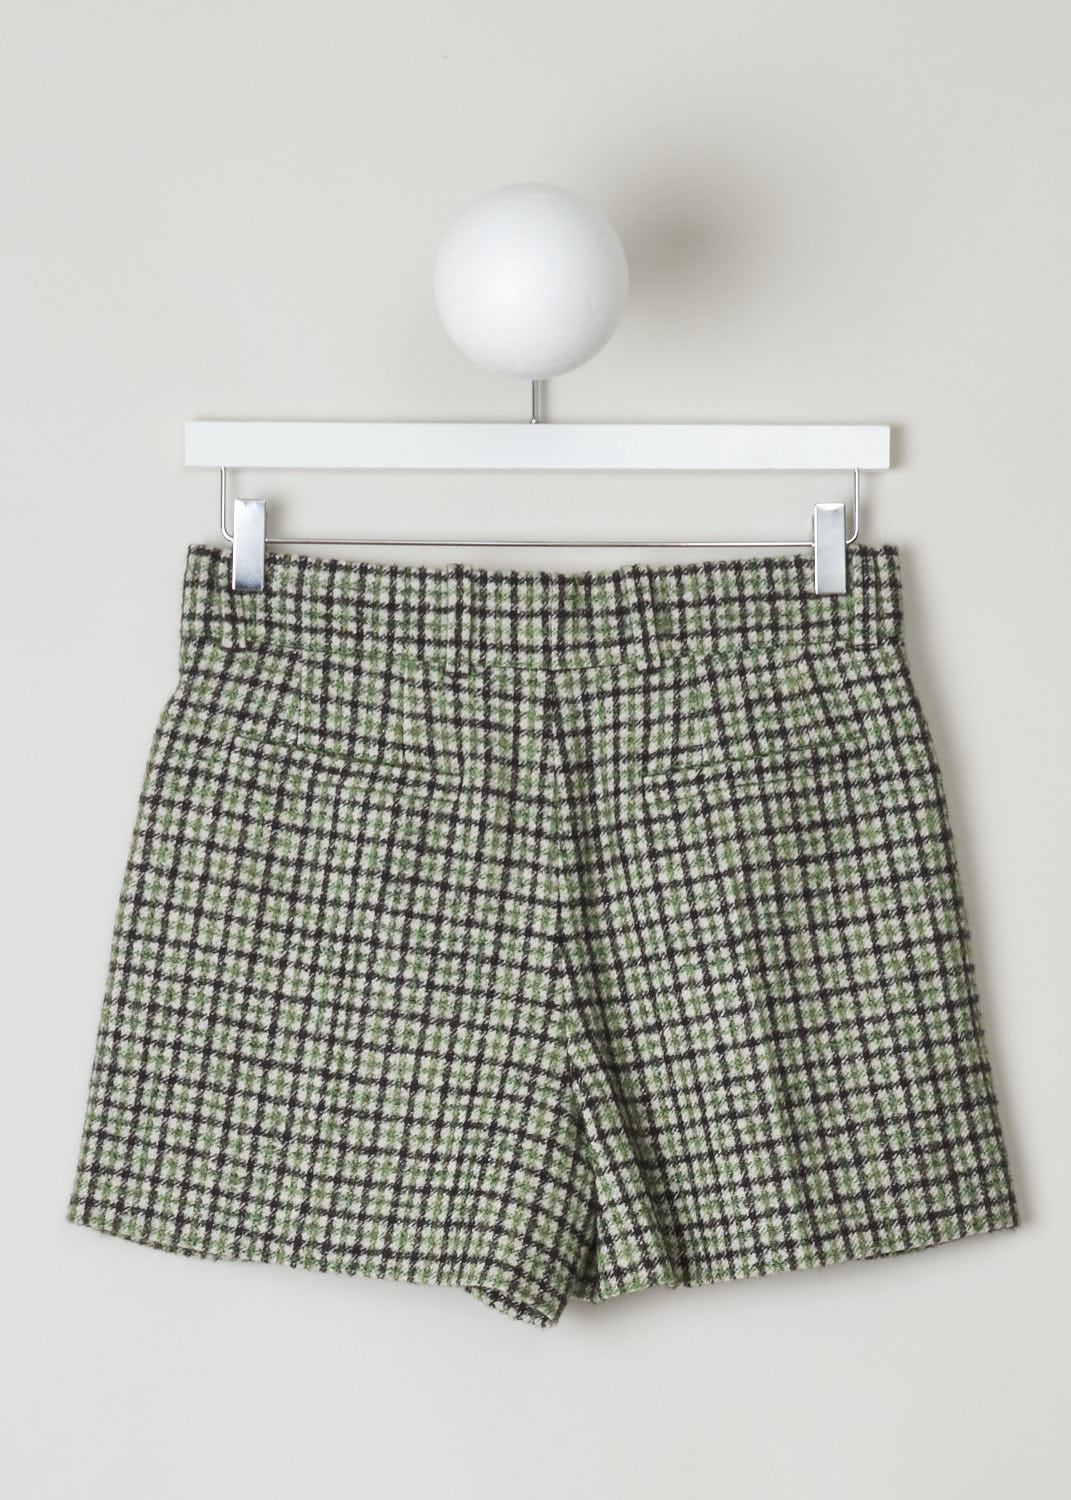 CHLOÃ‰, VIBRANT GREEN CHECK SHORTS, CHC21ASH2106439T38, Green, Print, Back, These beautiful vibrant green check shorts are soft to the touch. There is a concealed front closure with two hooks and a zipper and the shorts also have belt loops. The front of the shorts is decorated with pleats. Two forward slanted pockets can also be found in the front and two welt pockets on the back. 